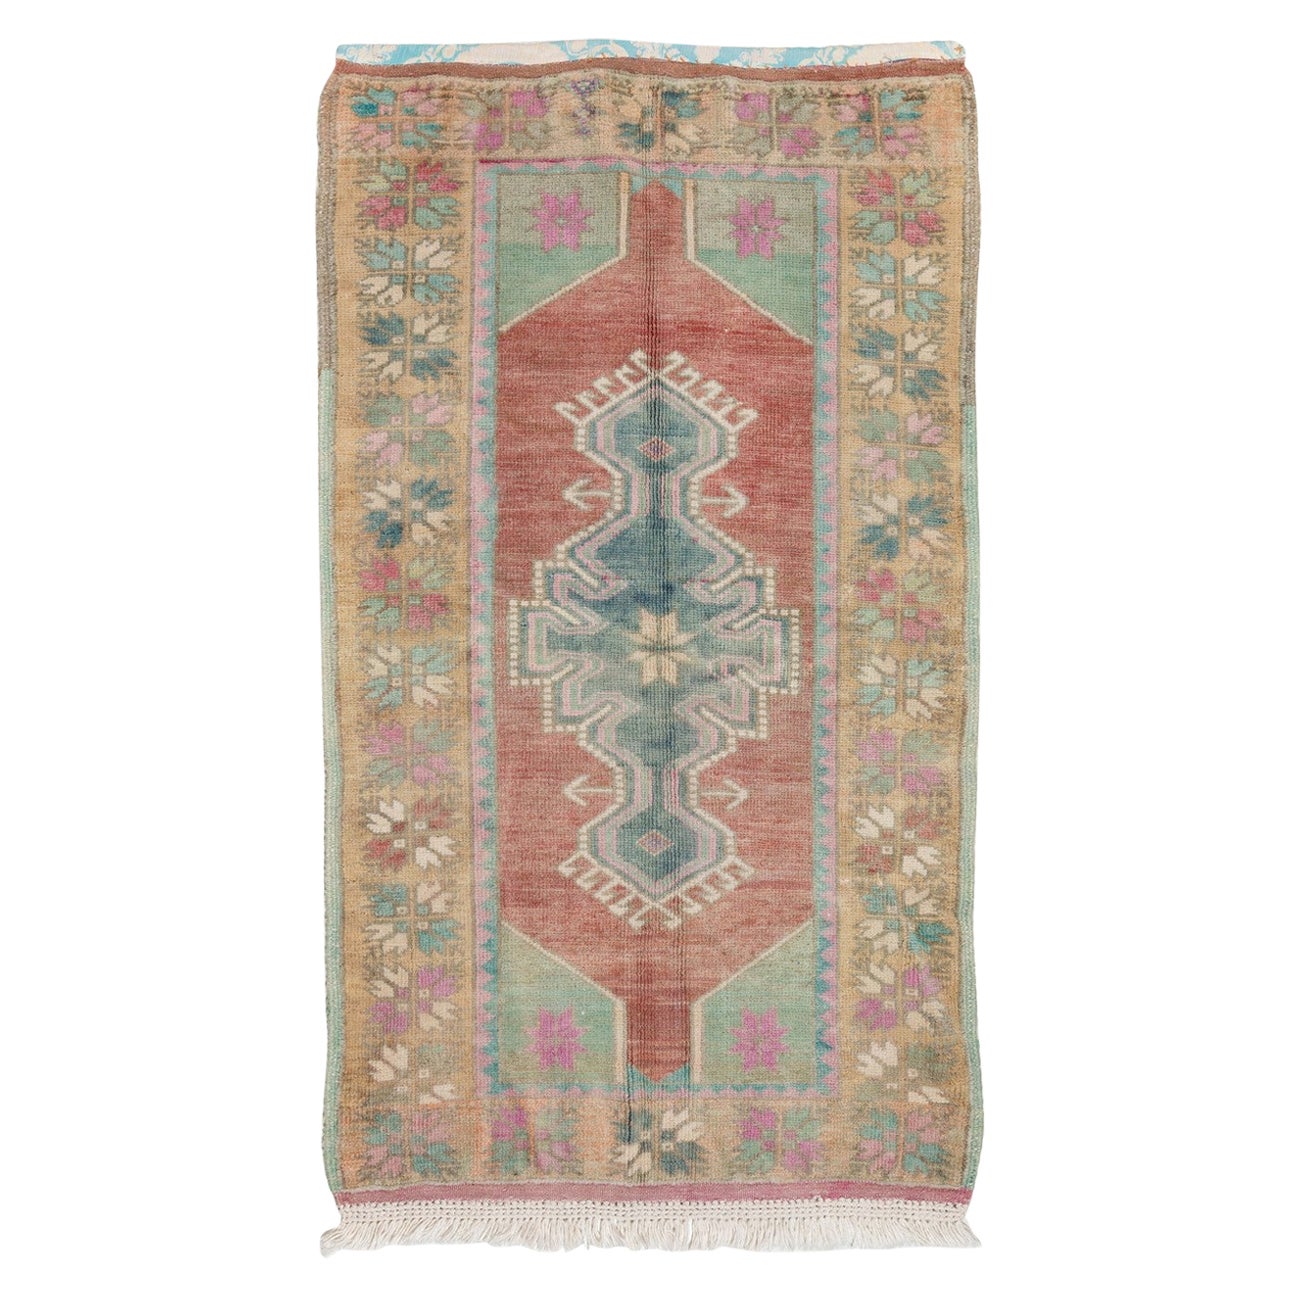 2.8x4.6 Ft Vintage Turkish Scatter Rug in Soft Red, Green, Pink & Purple Colors